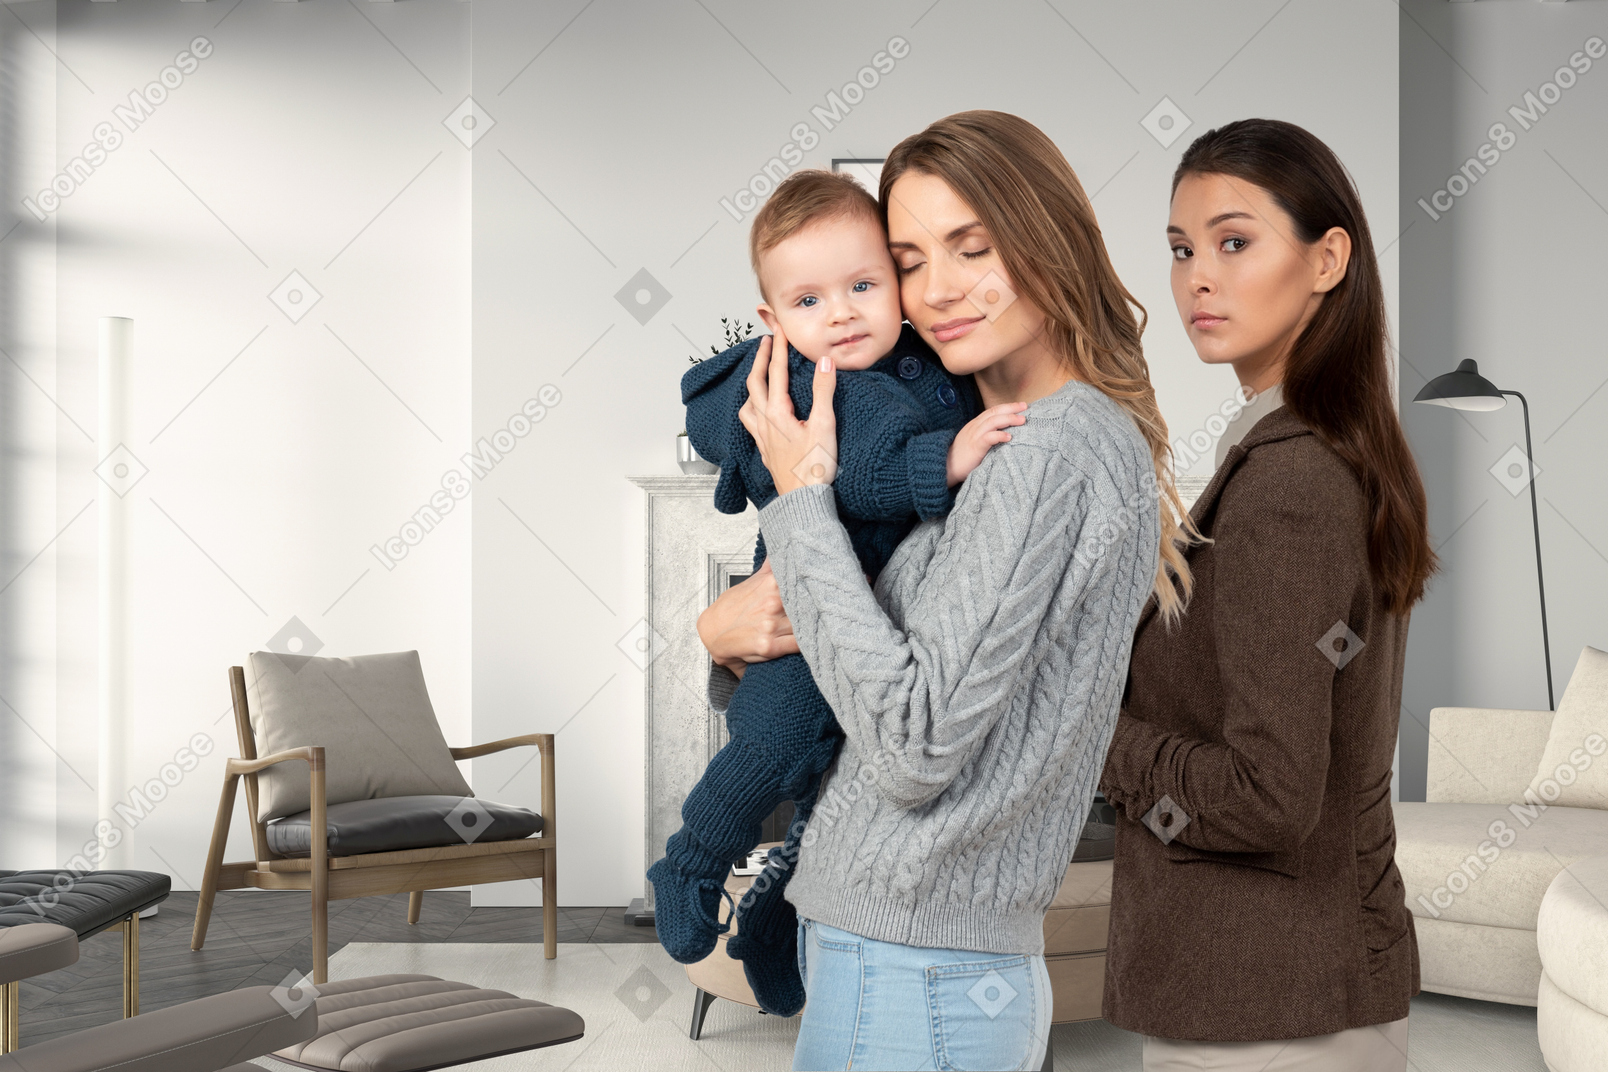 Young woman standing near woman which holding baby child